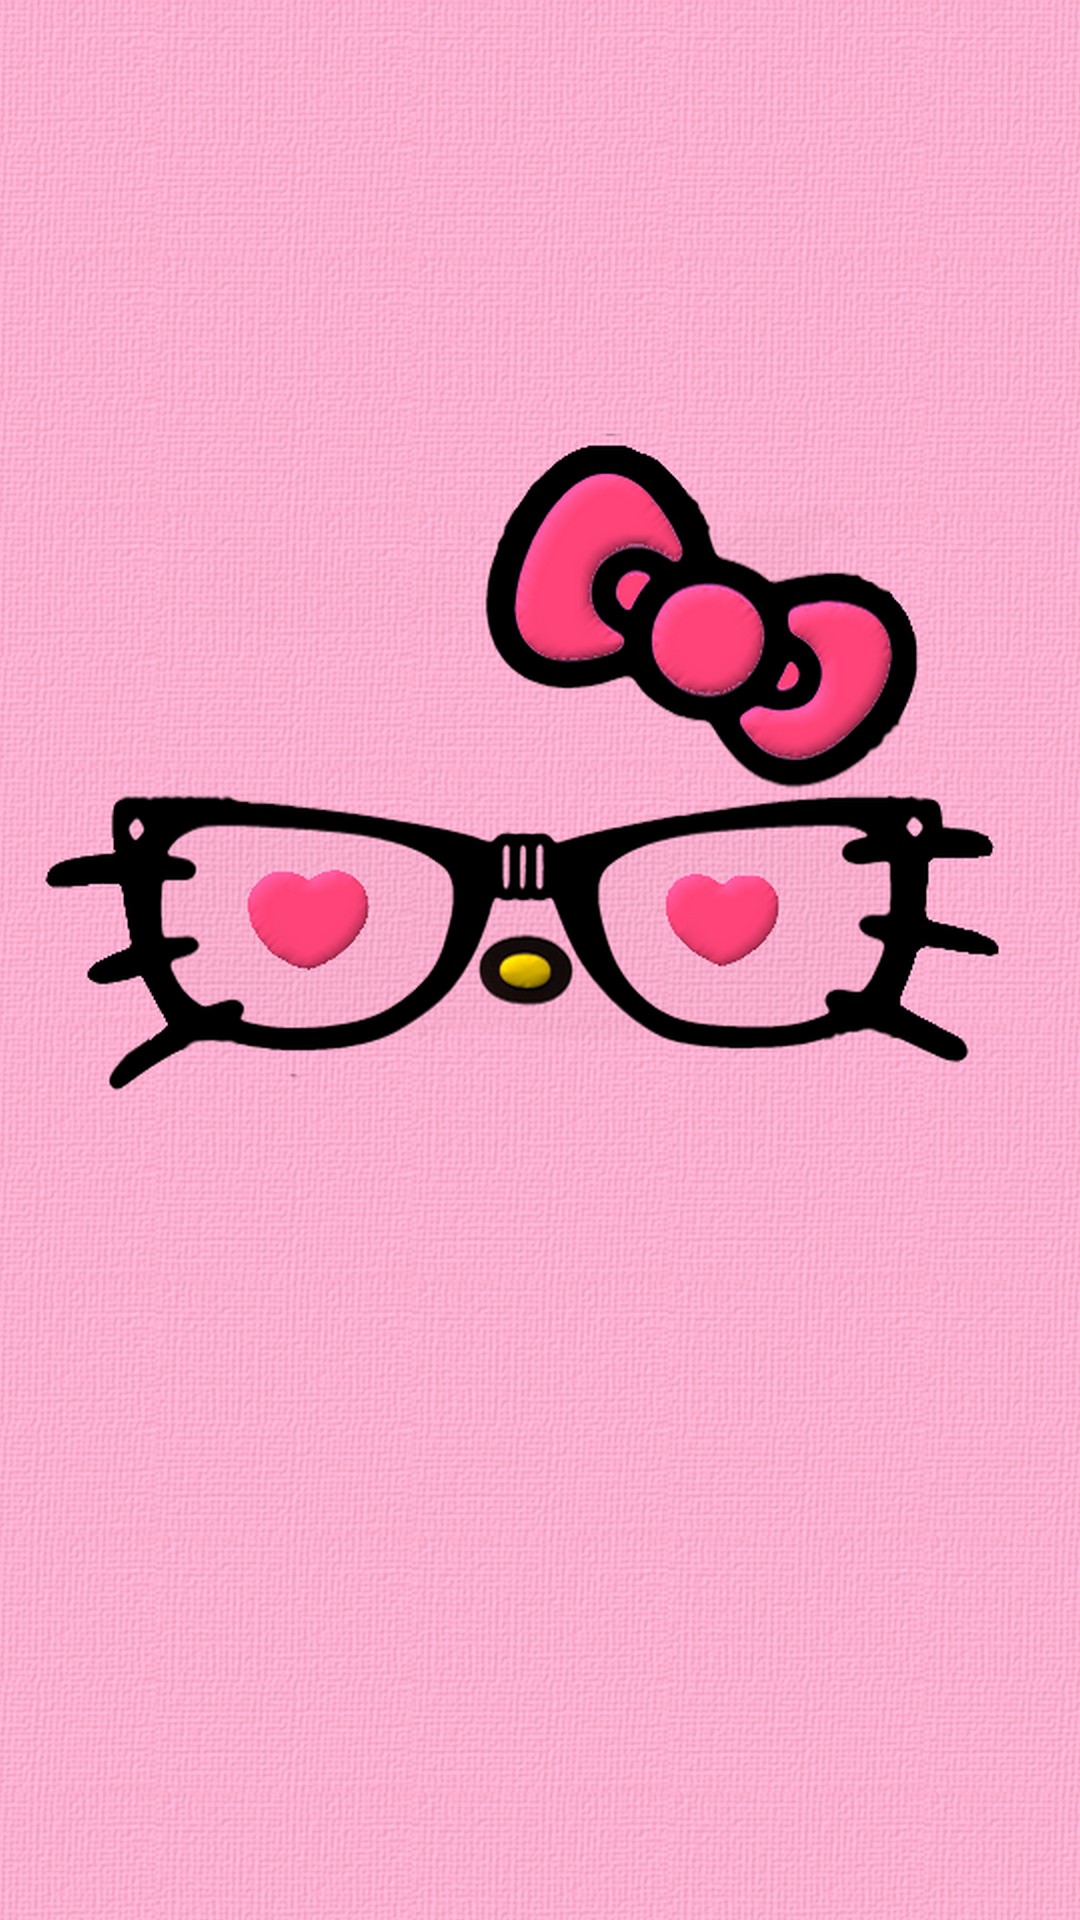 Sanrio Hello Kitty iPhone 7 Wallpaper with image resolution 1080x1920 pixel. You can use this wallpaper as background for your desktop Computer Screensavers, Android or iPhone smartphones